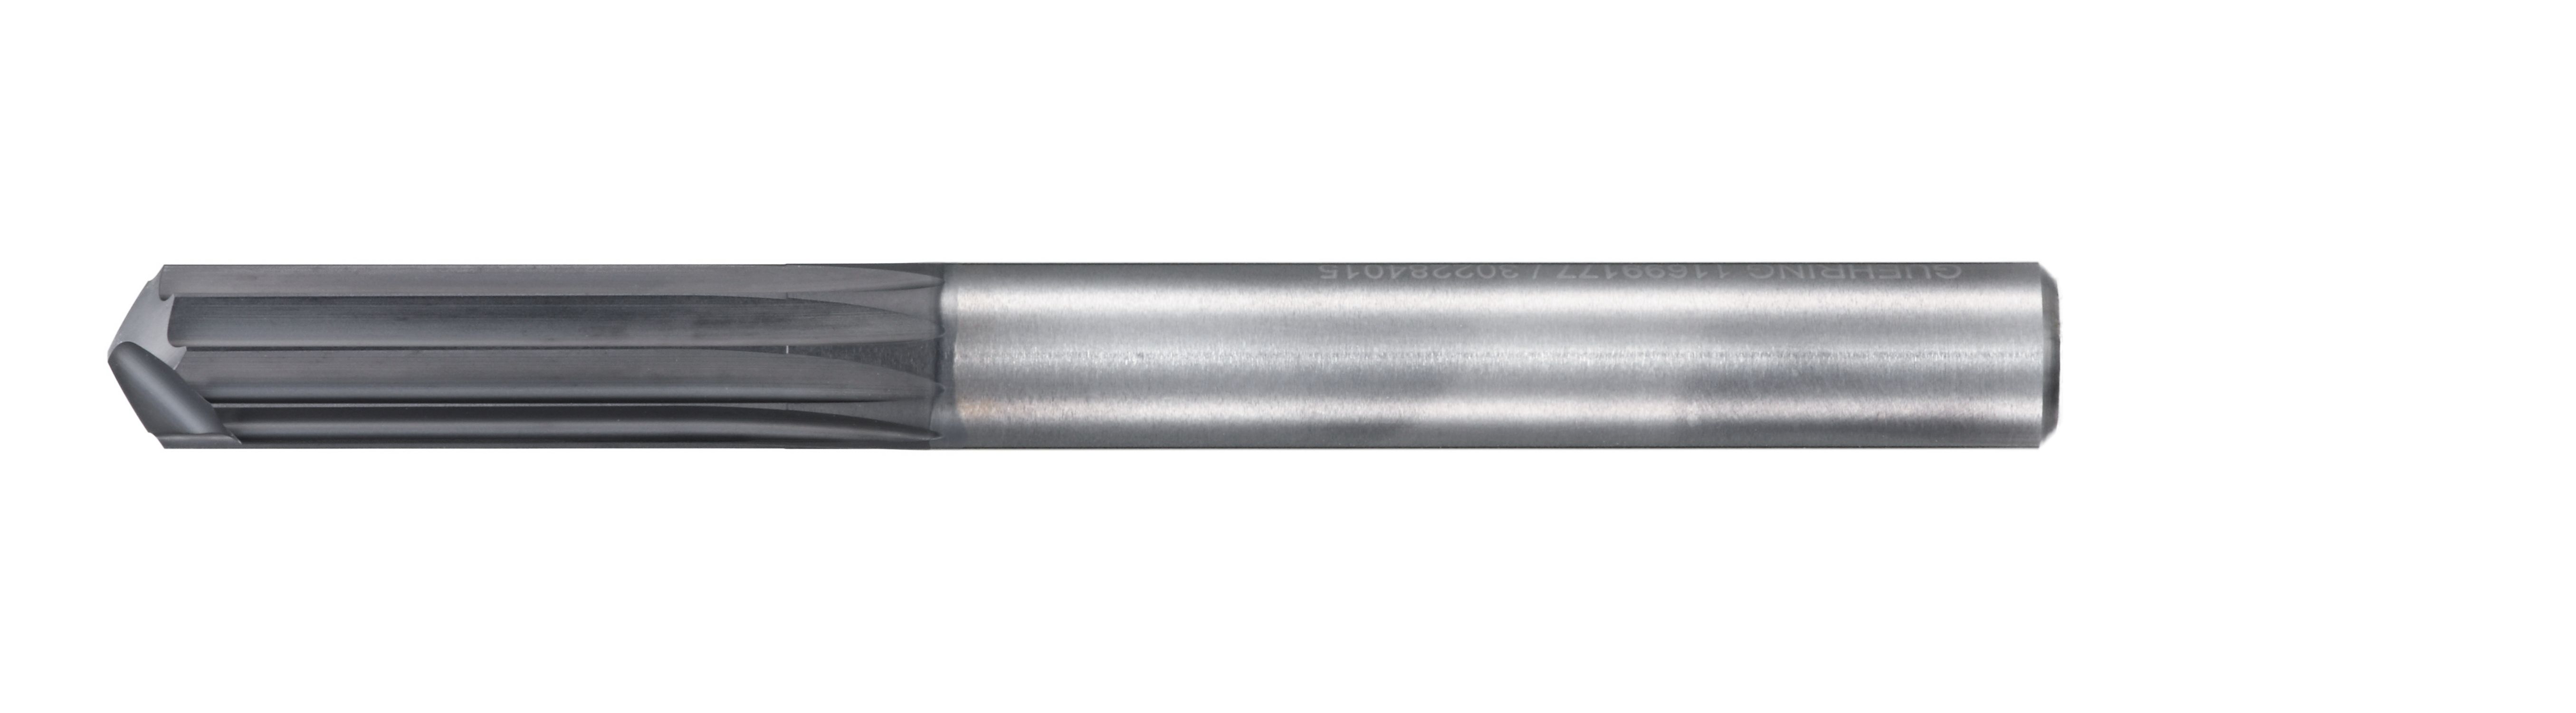 Grooving/Shouldering Multi-Flute End Mill for CFRP with Drill Point CR100 6720 6720-016.000